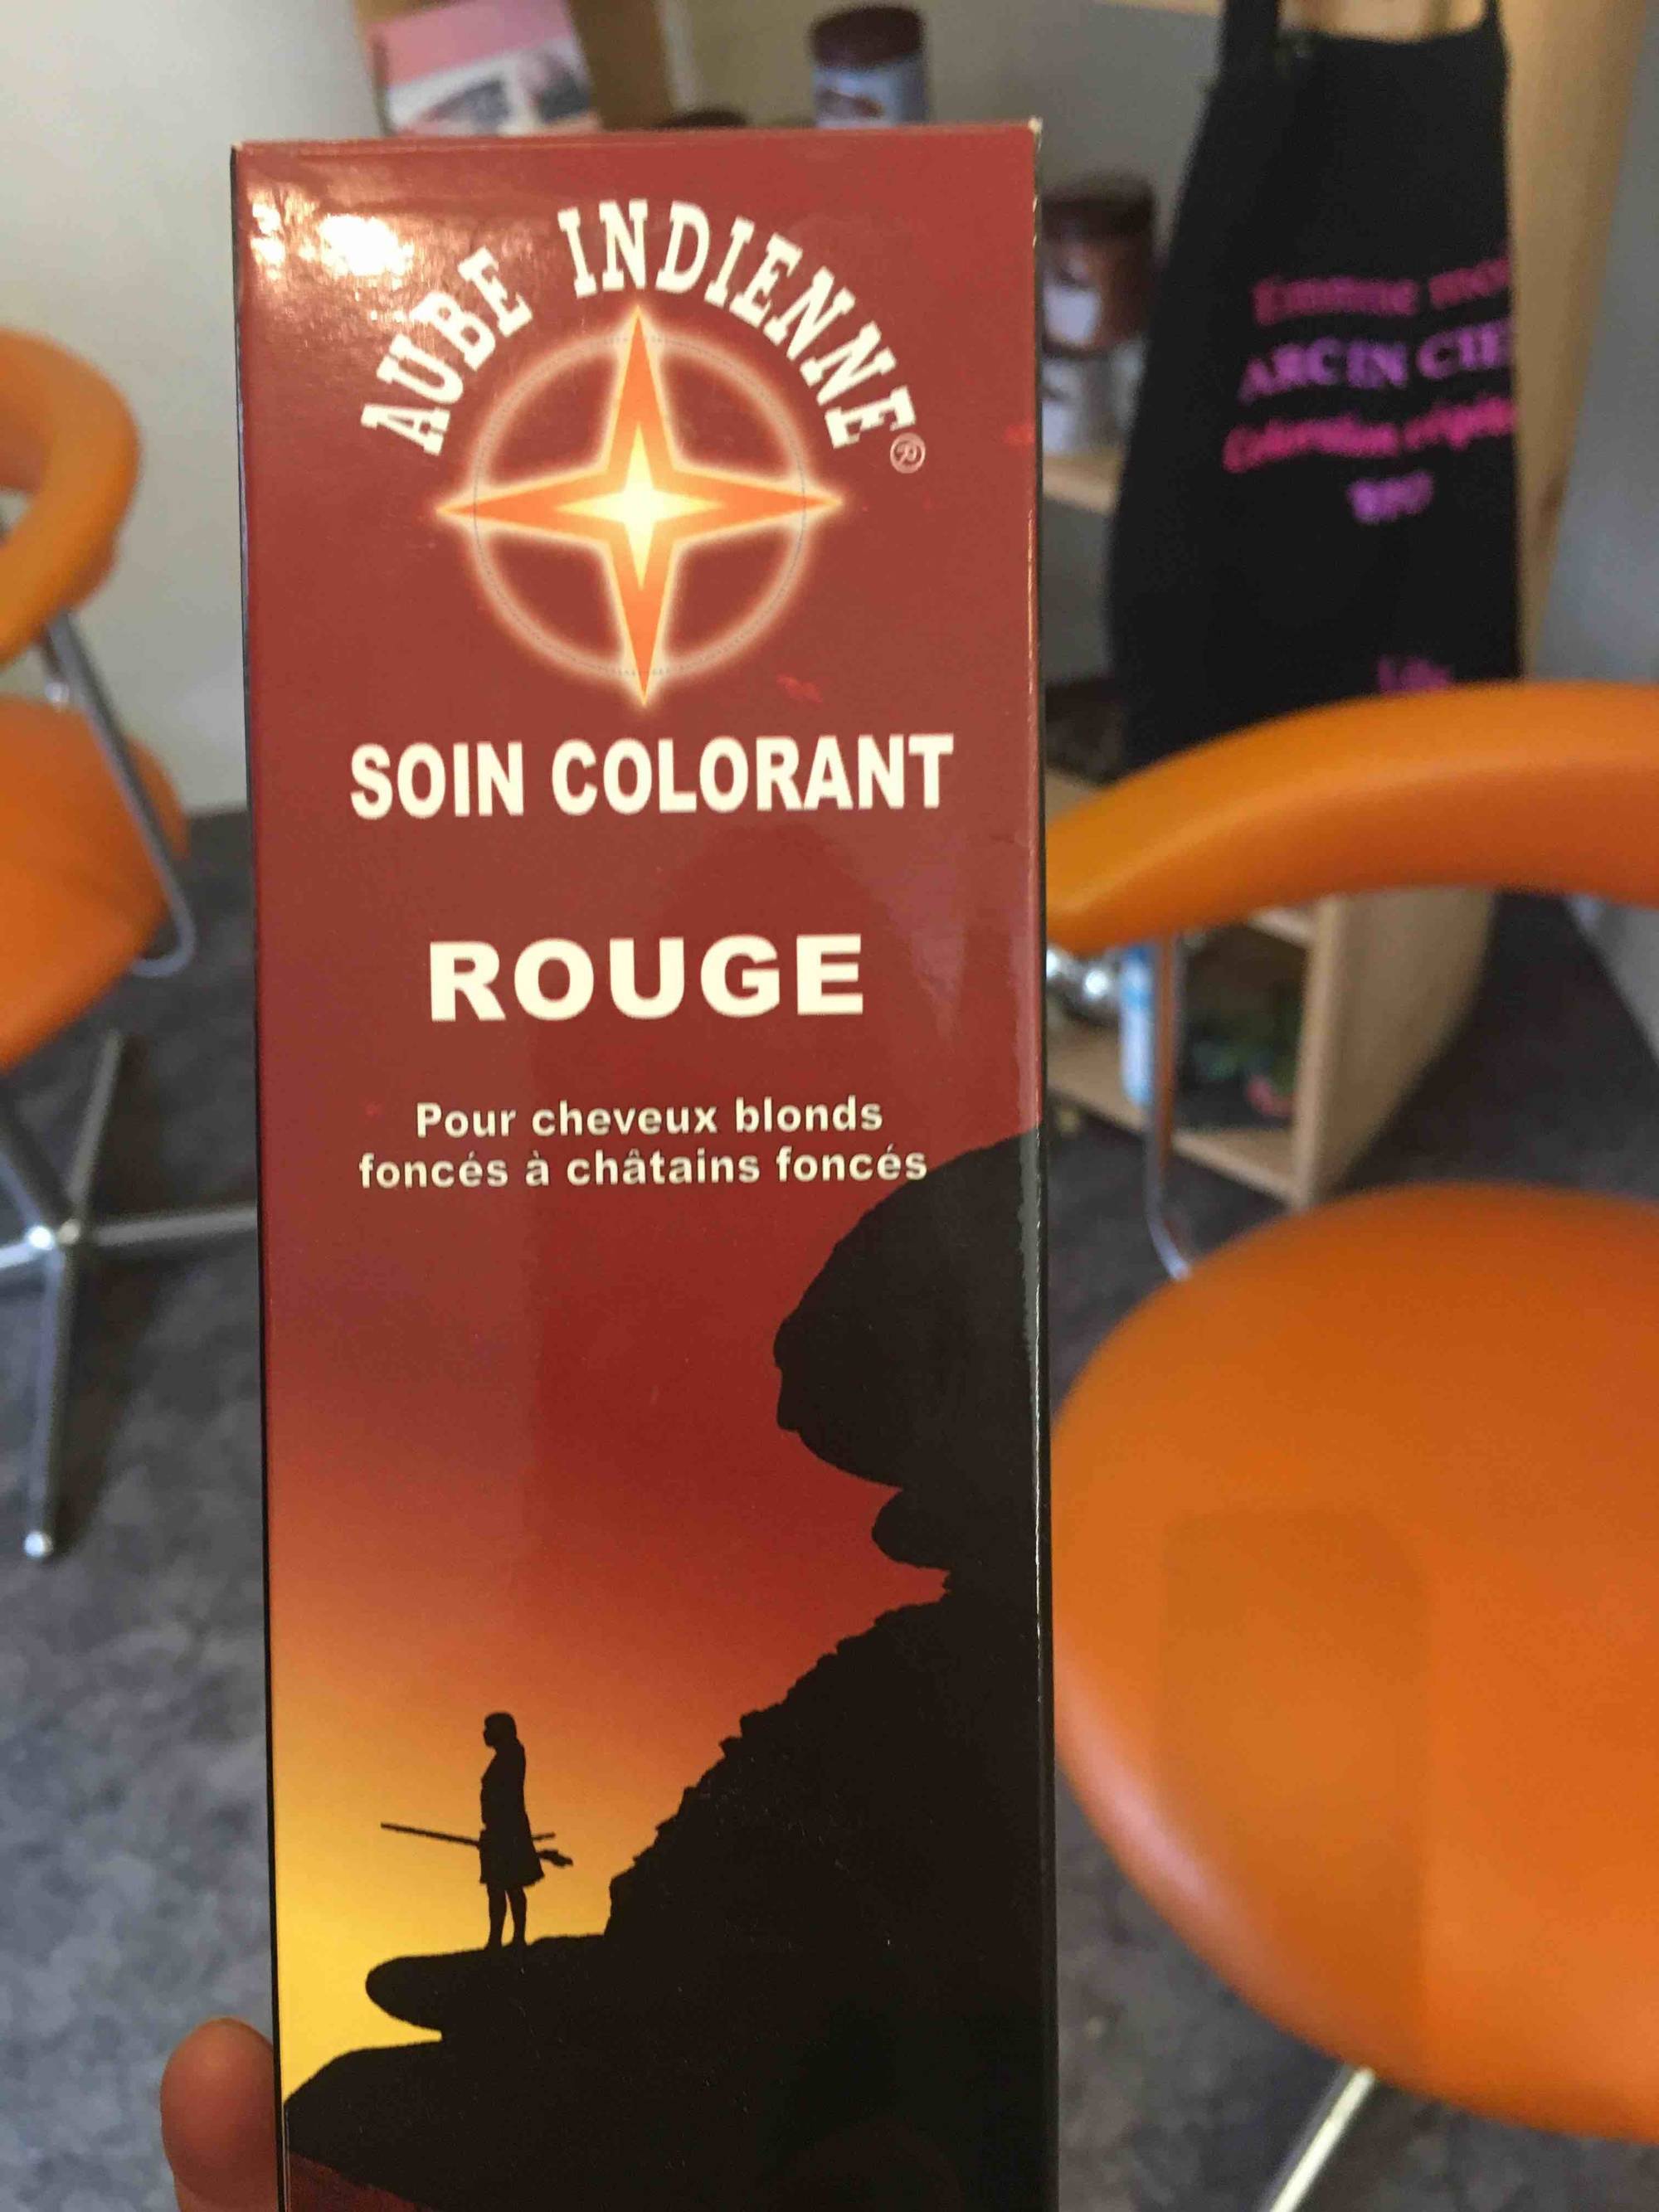 AUBE INDIENNE - Soin colorant rouge 